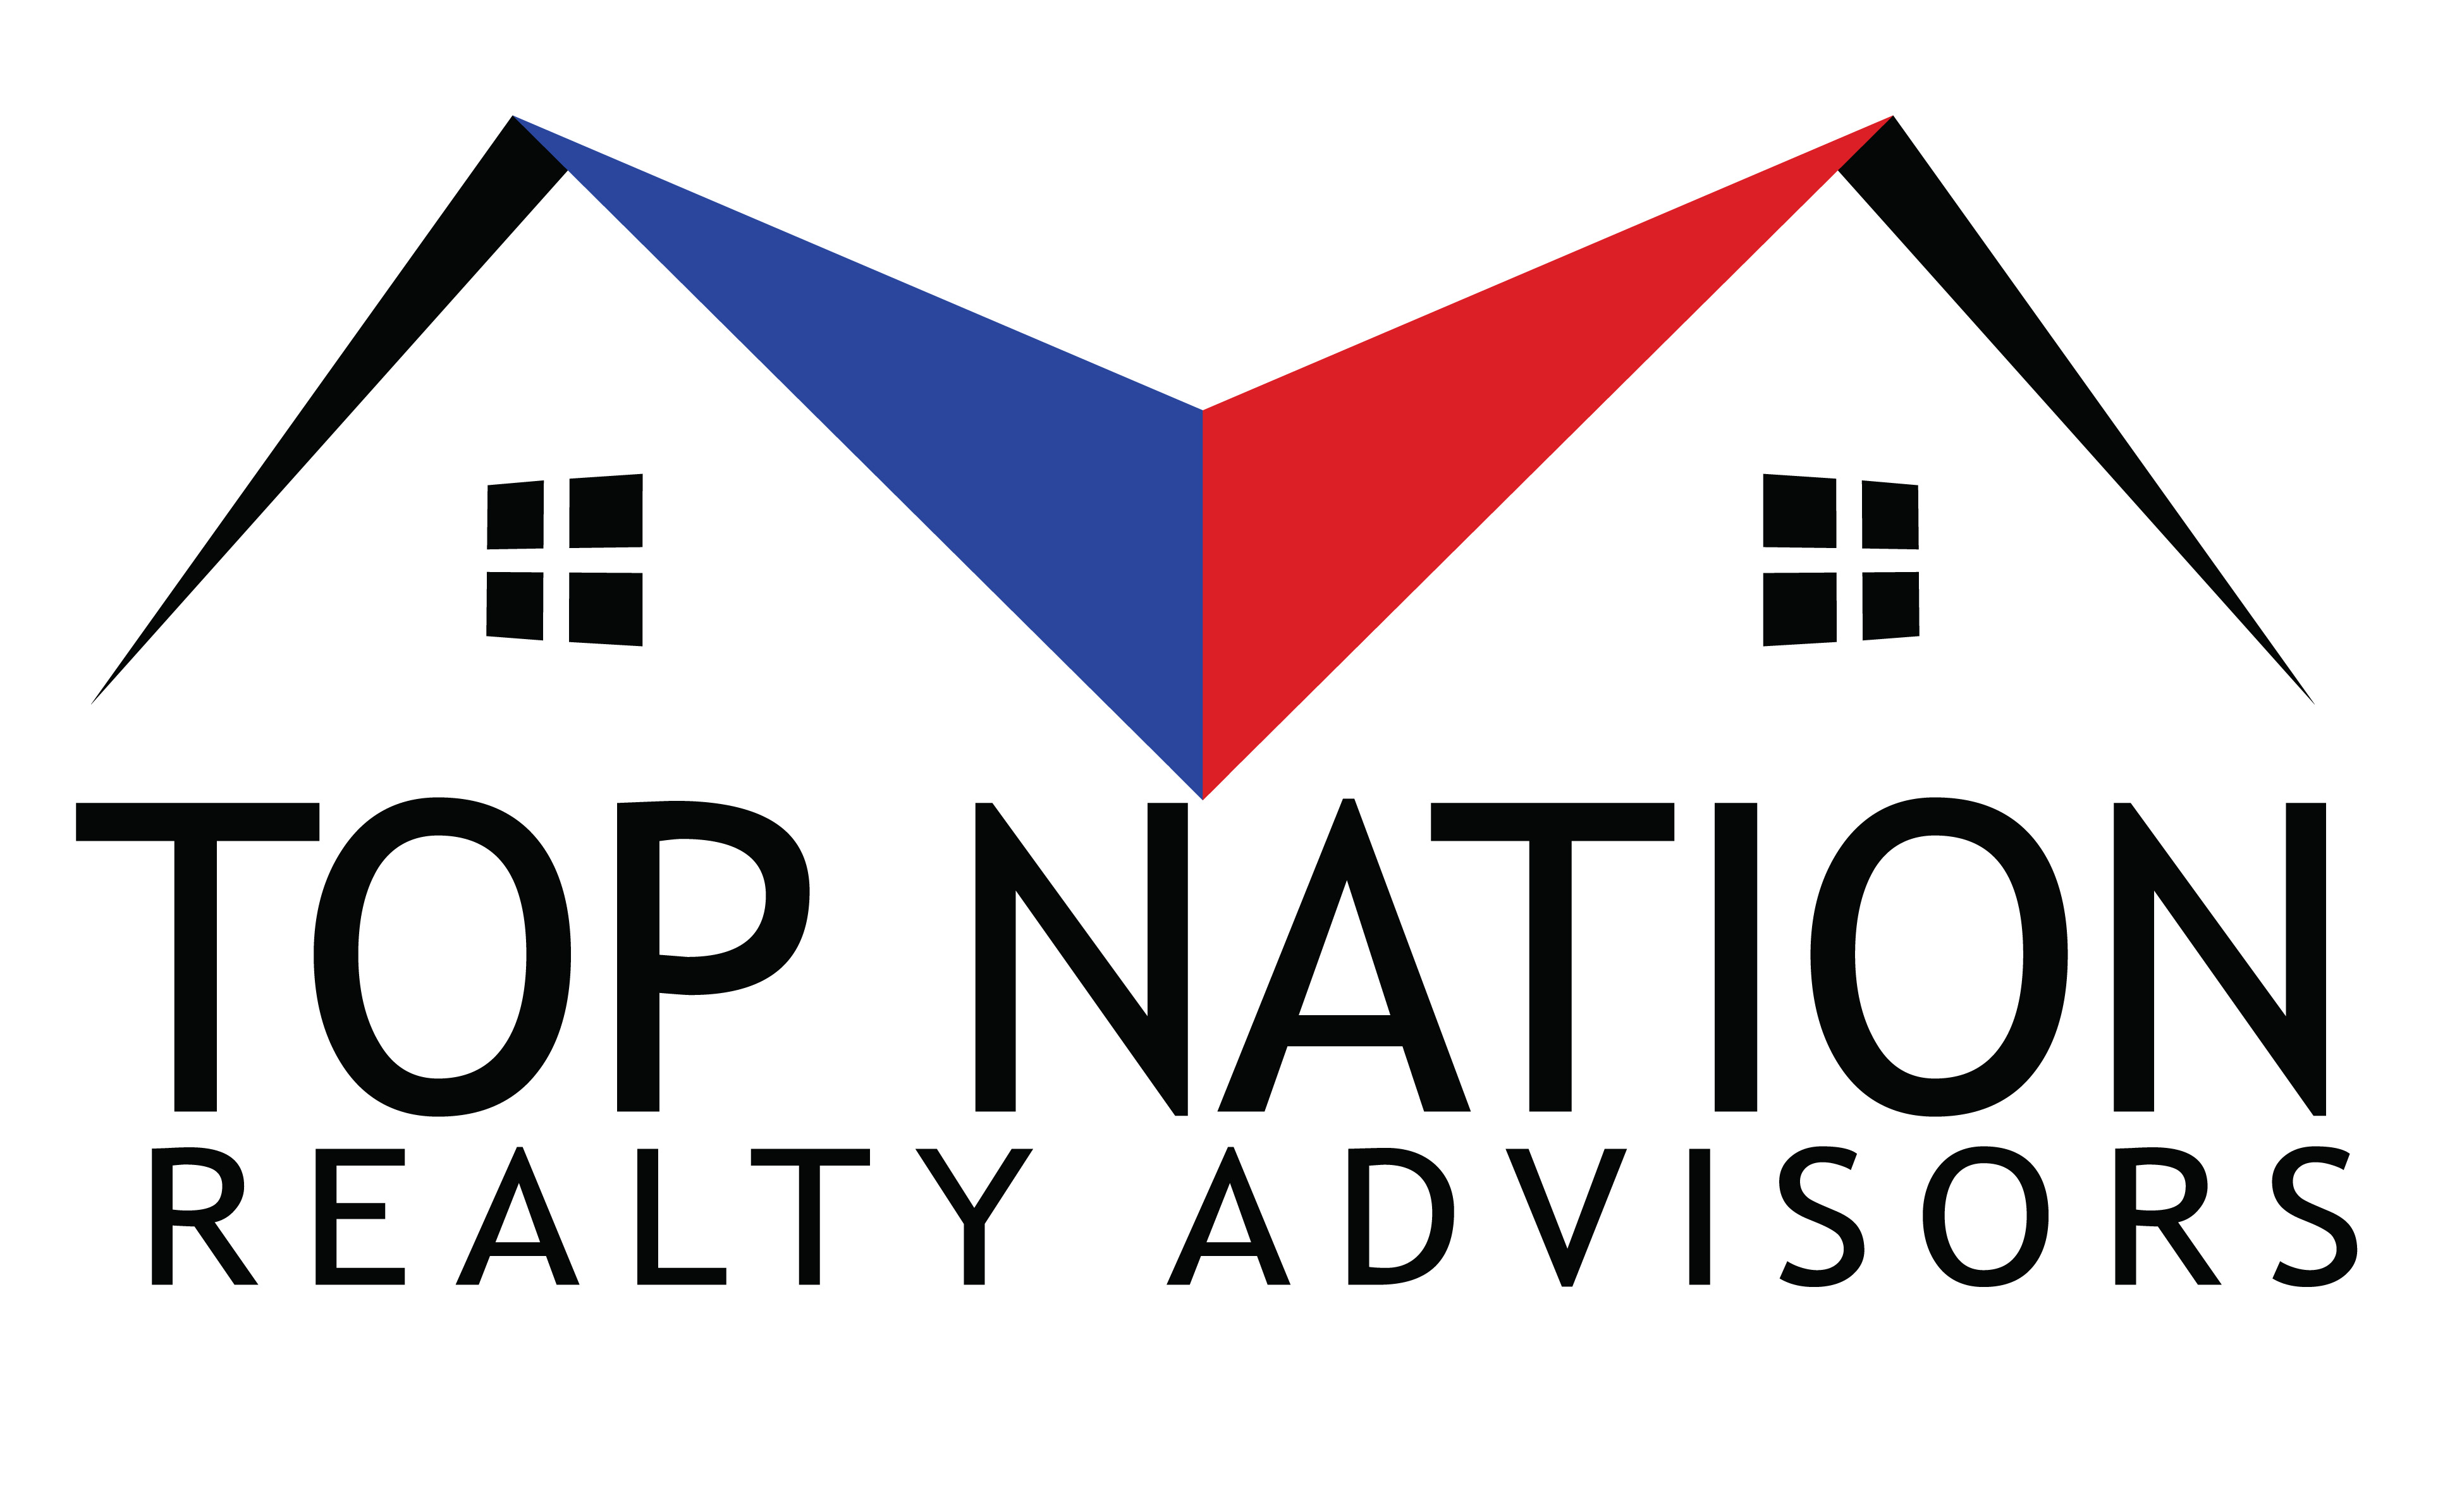 TOP NATION REALTY ADVISORS